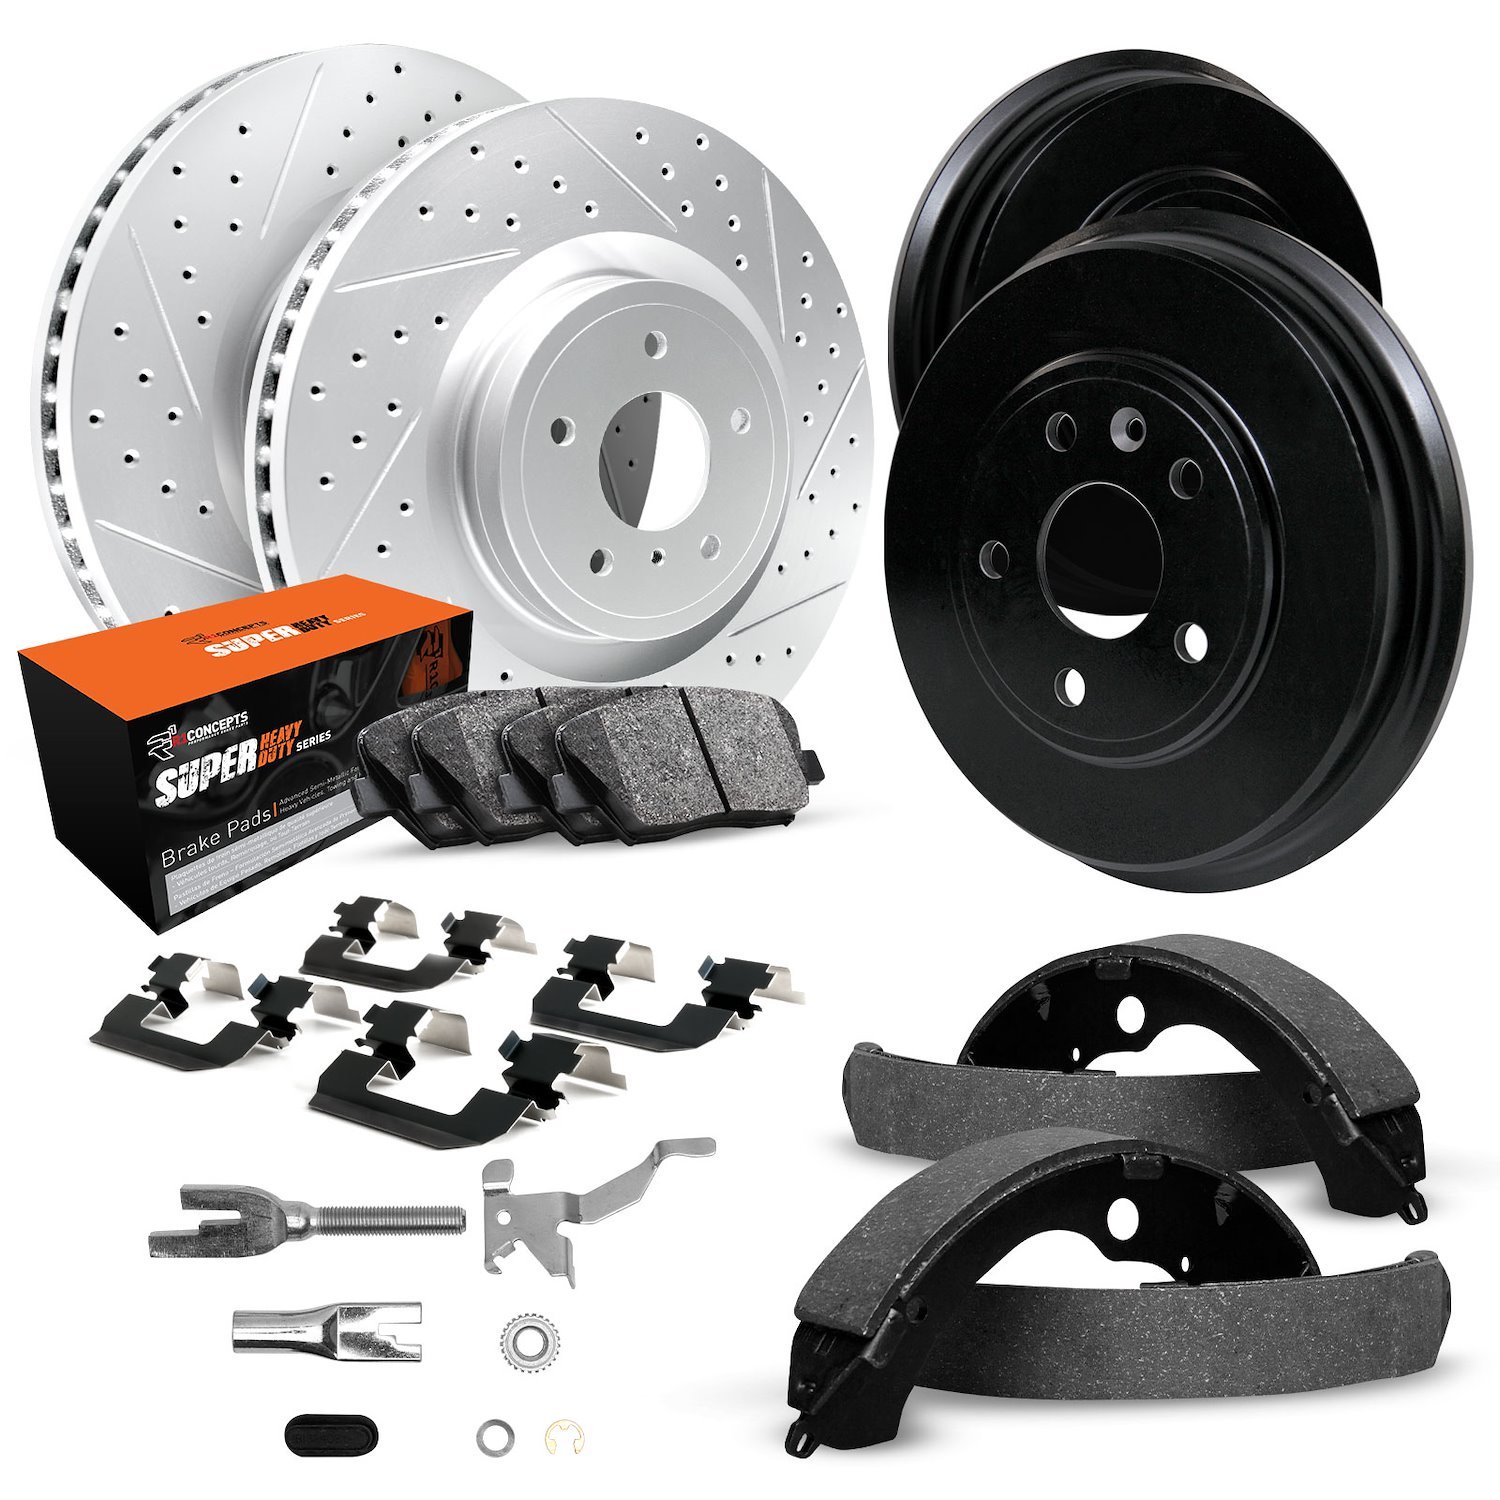 GEO-Carbon Drilled/Slotted Rotors/Drums w/Super-Duty Pads/Shoes/Hardware/Adjusters, 1994-1999 Mopar, Position: Front/Rear